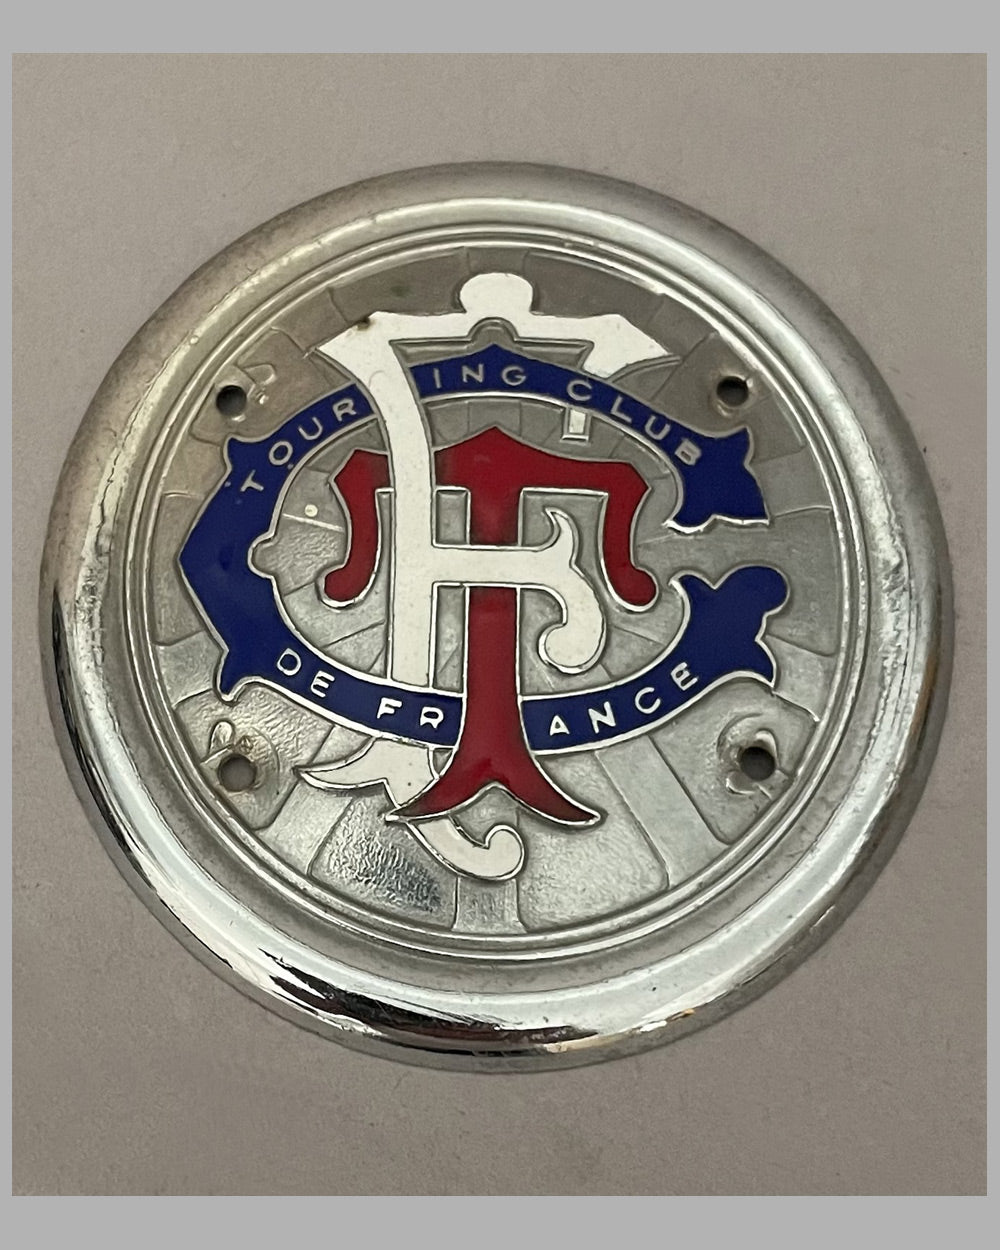 Touring Club de France grill badge